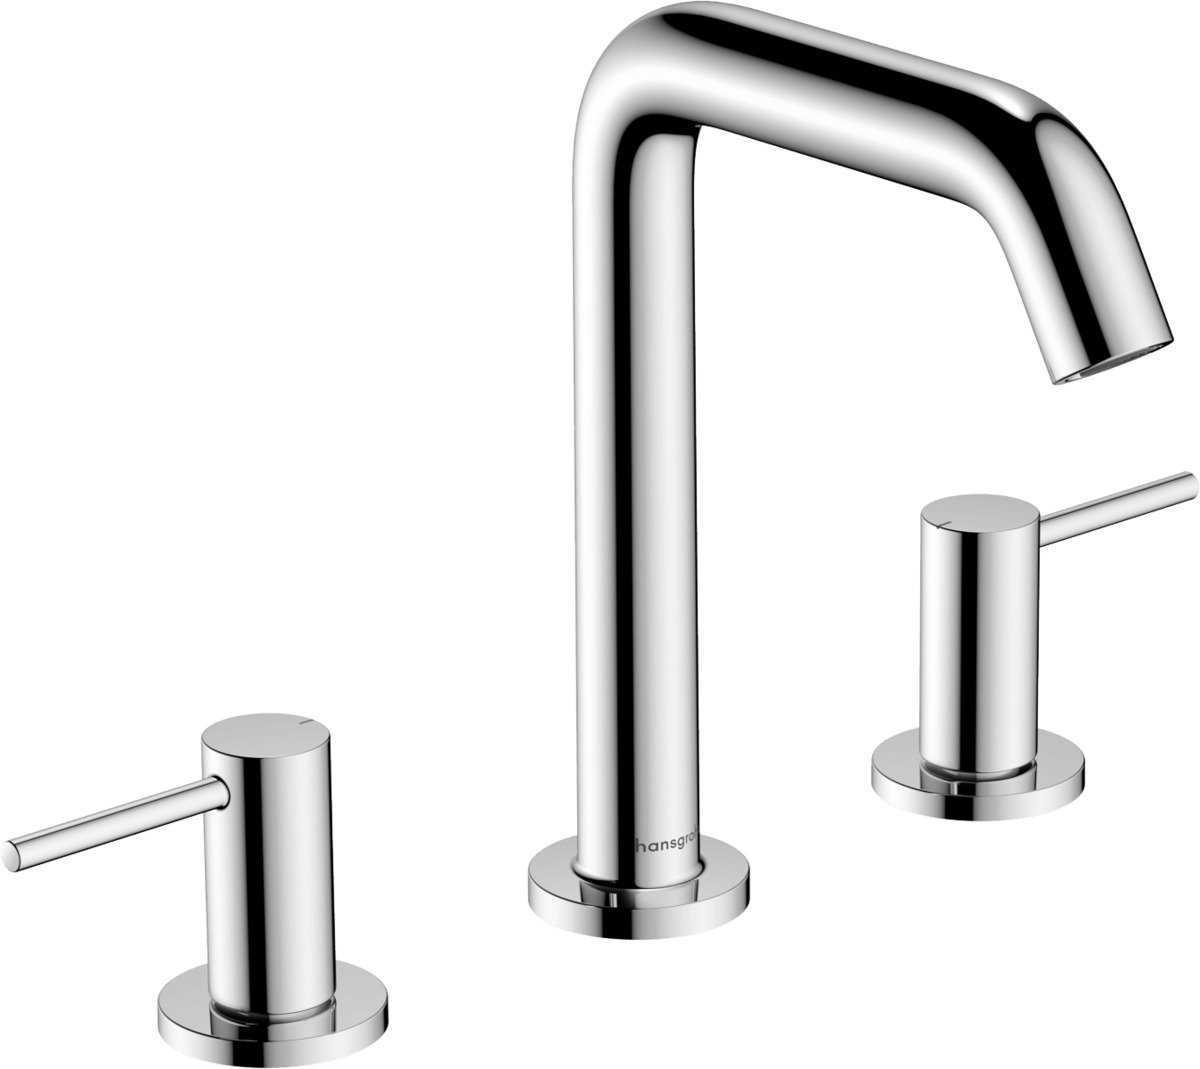 Umyvadlová baterie Hansgrohe Tecturis S s clic-clacem chrom 73330000 Hansgrohe